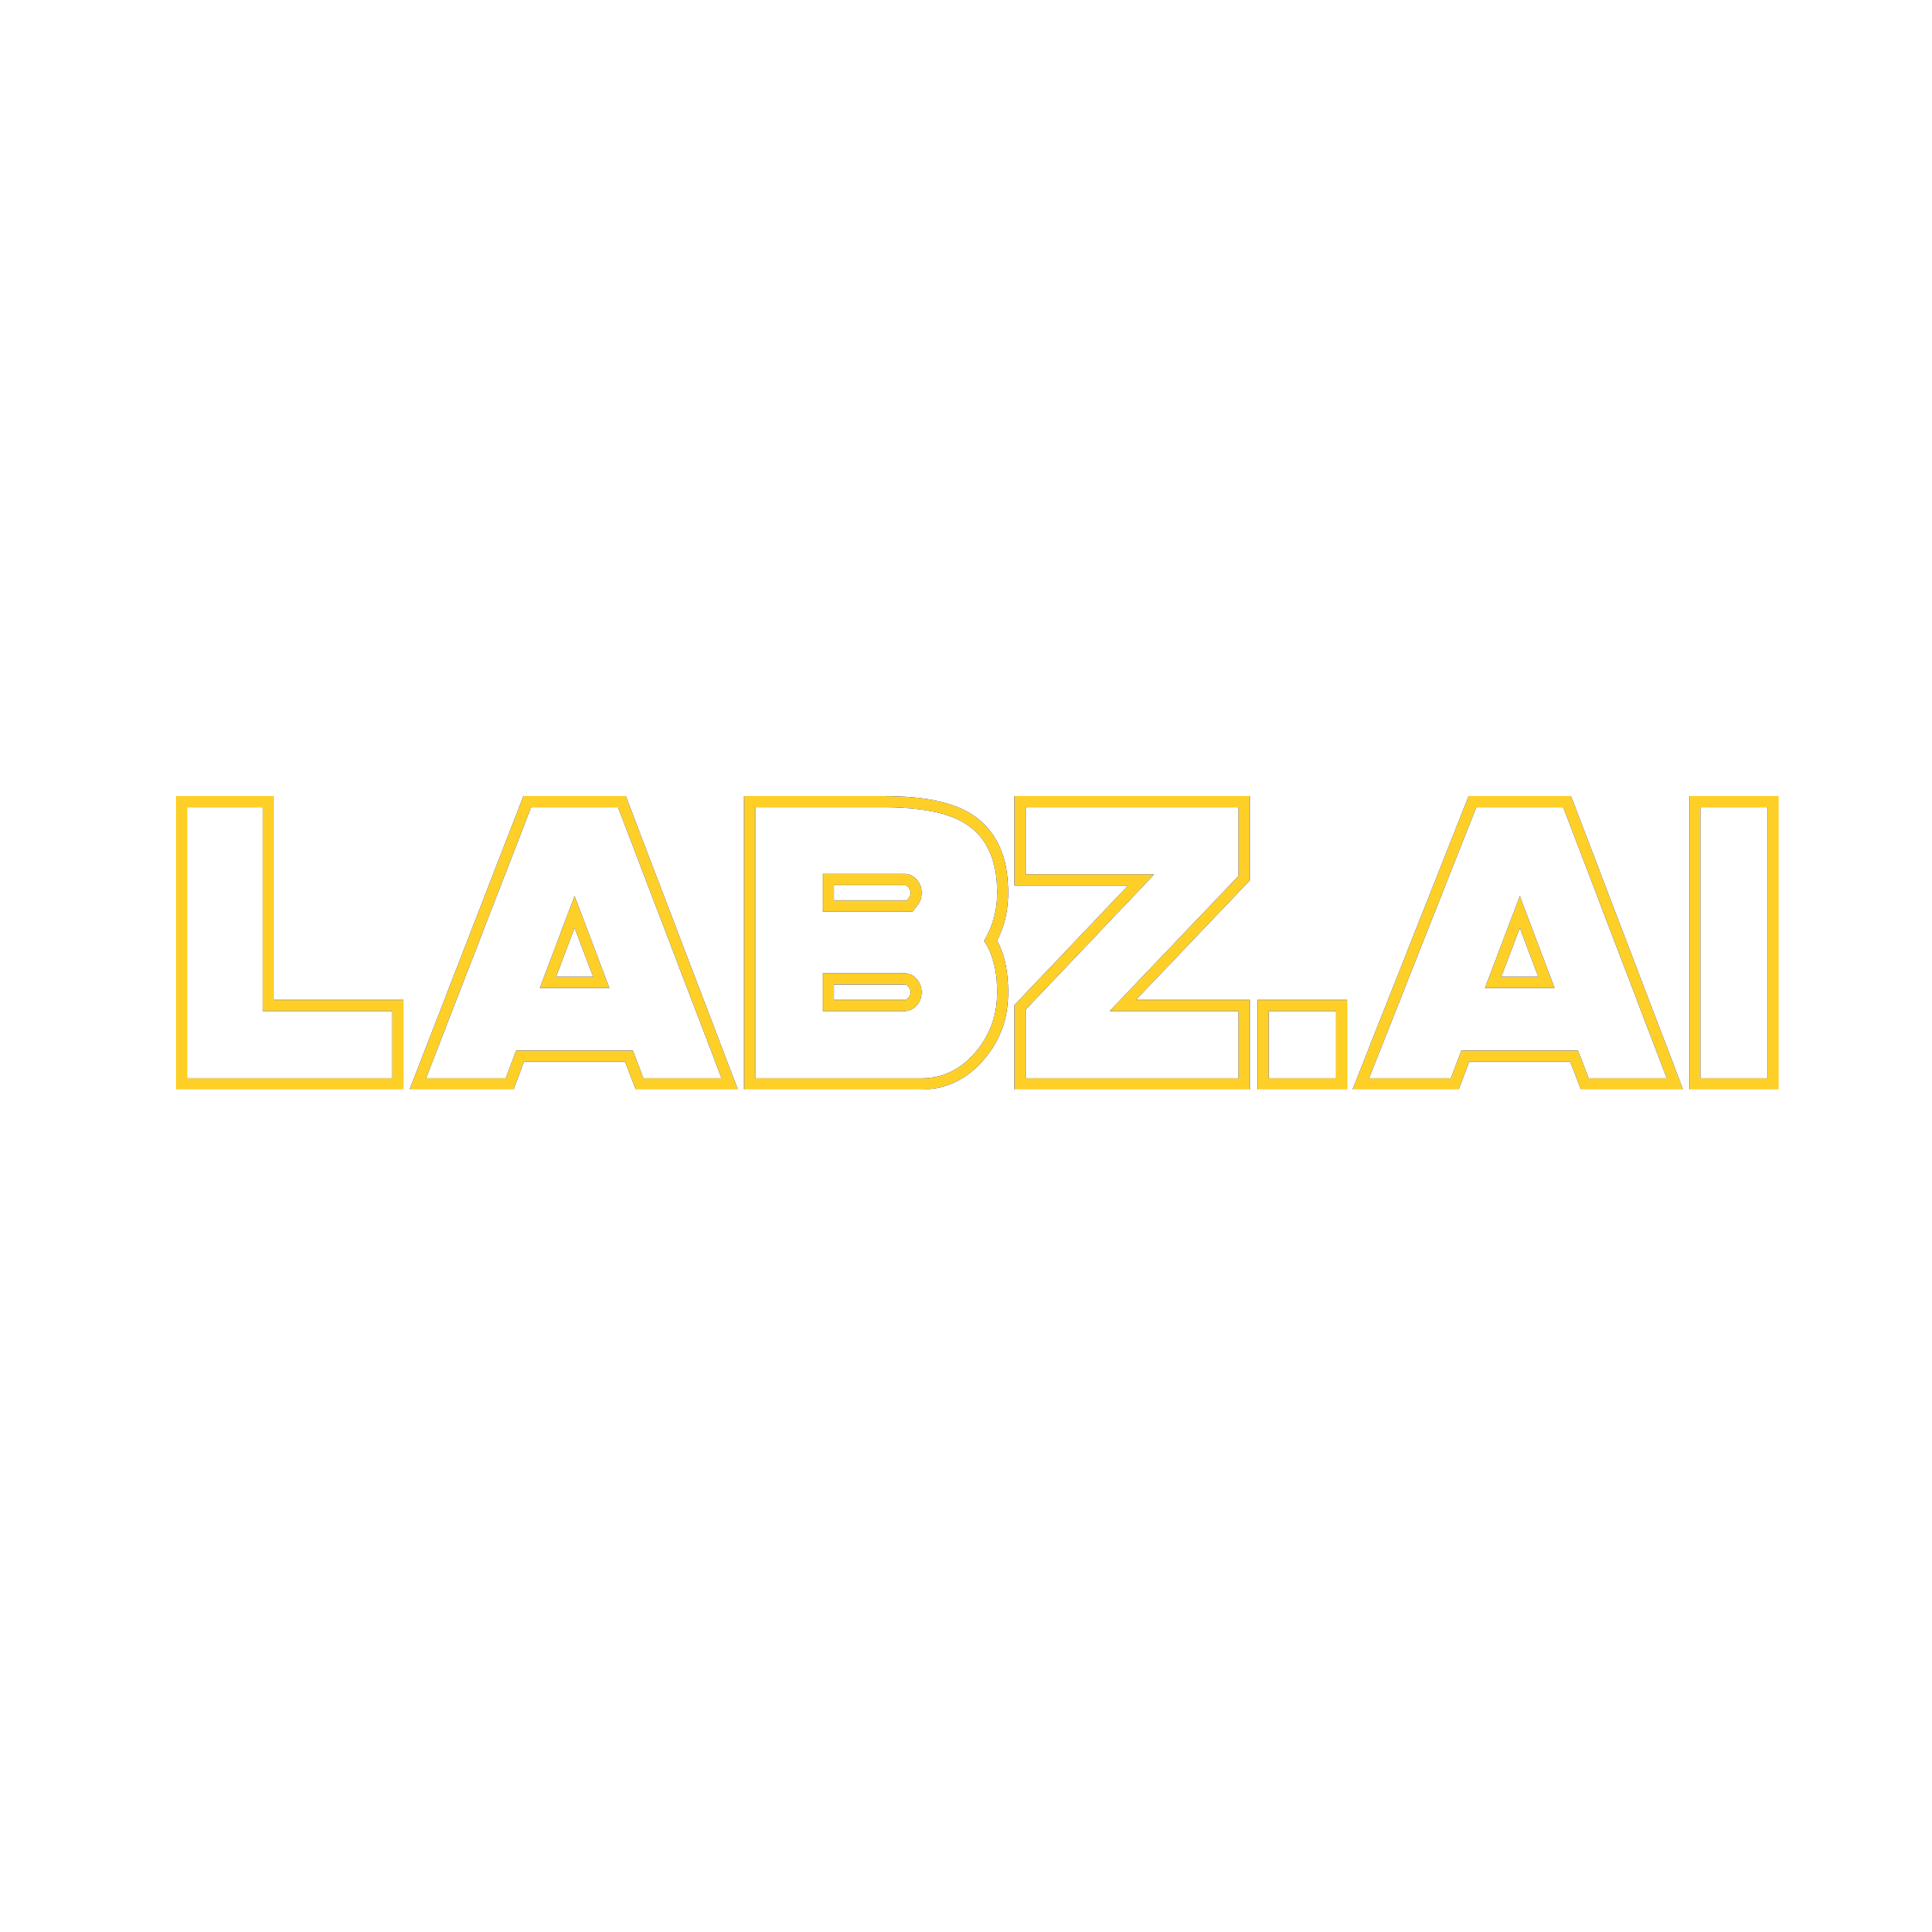 2252-labz-yellow-09-01.png